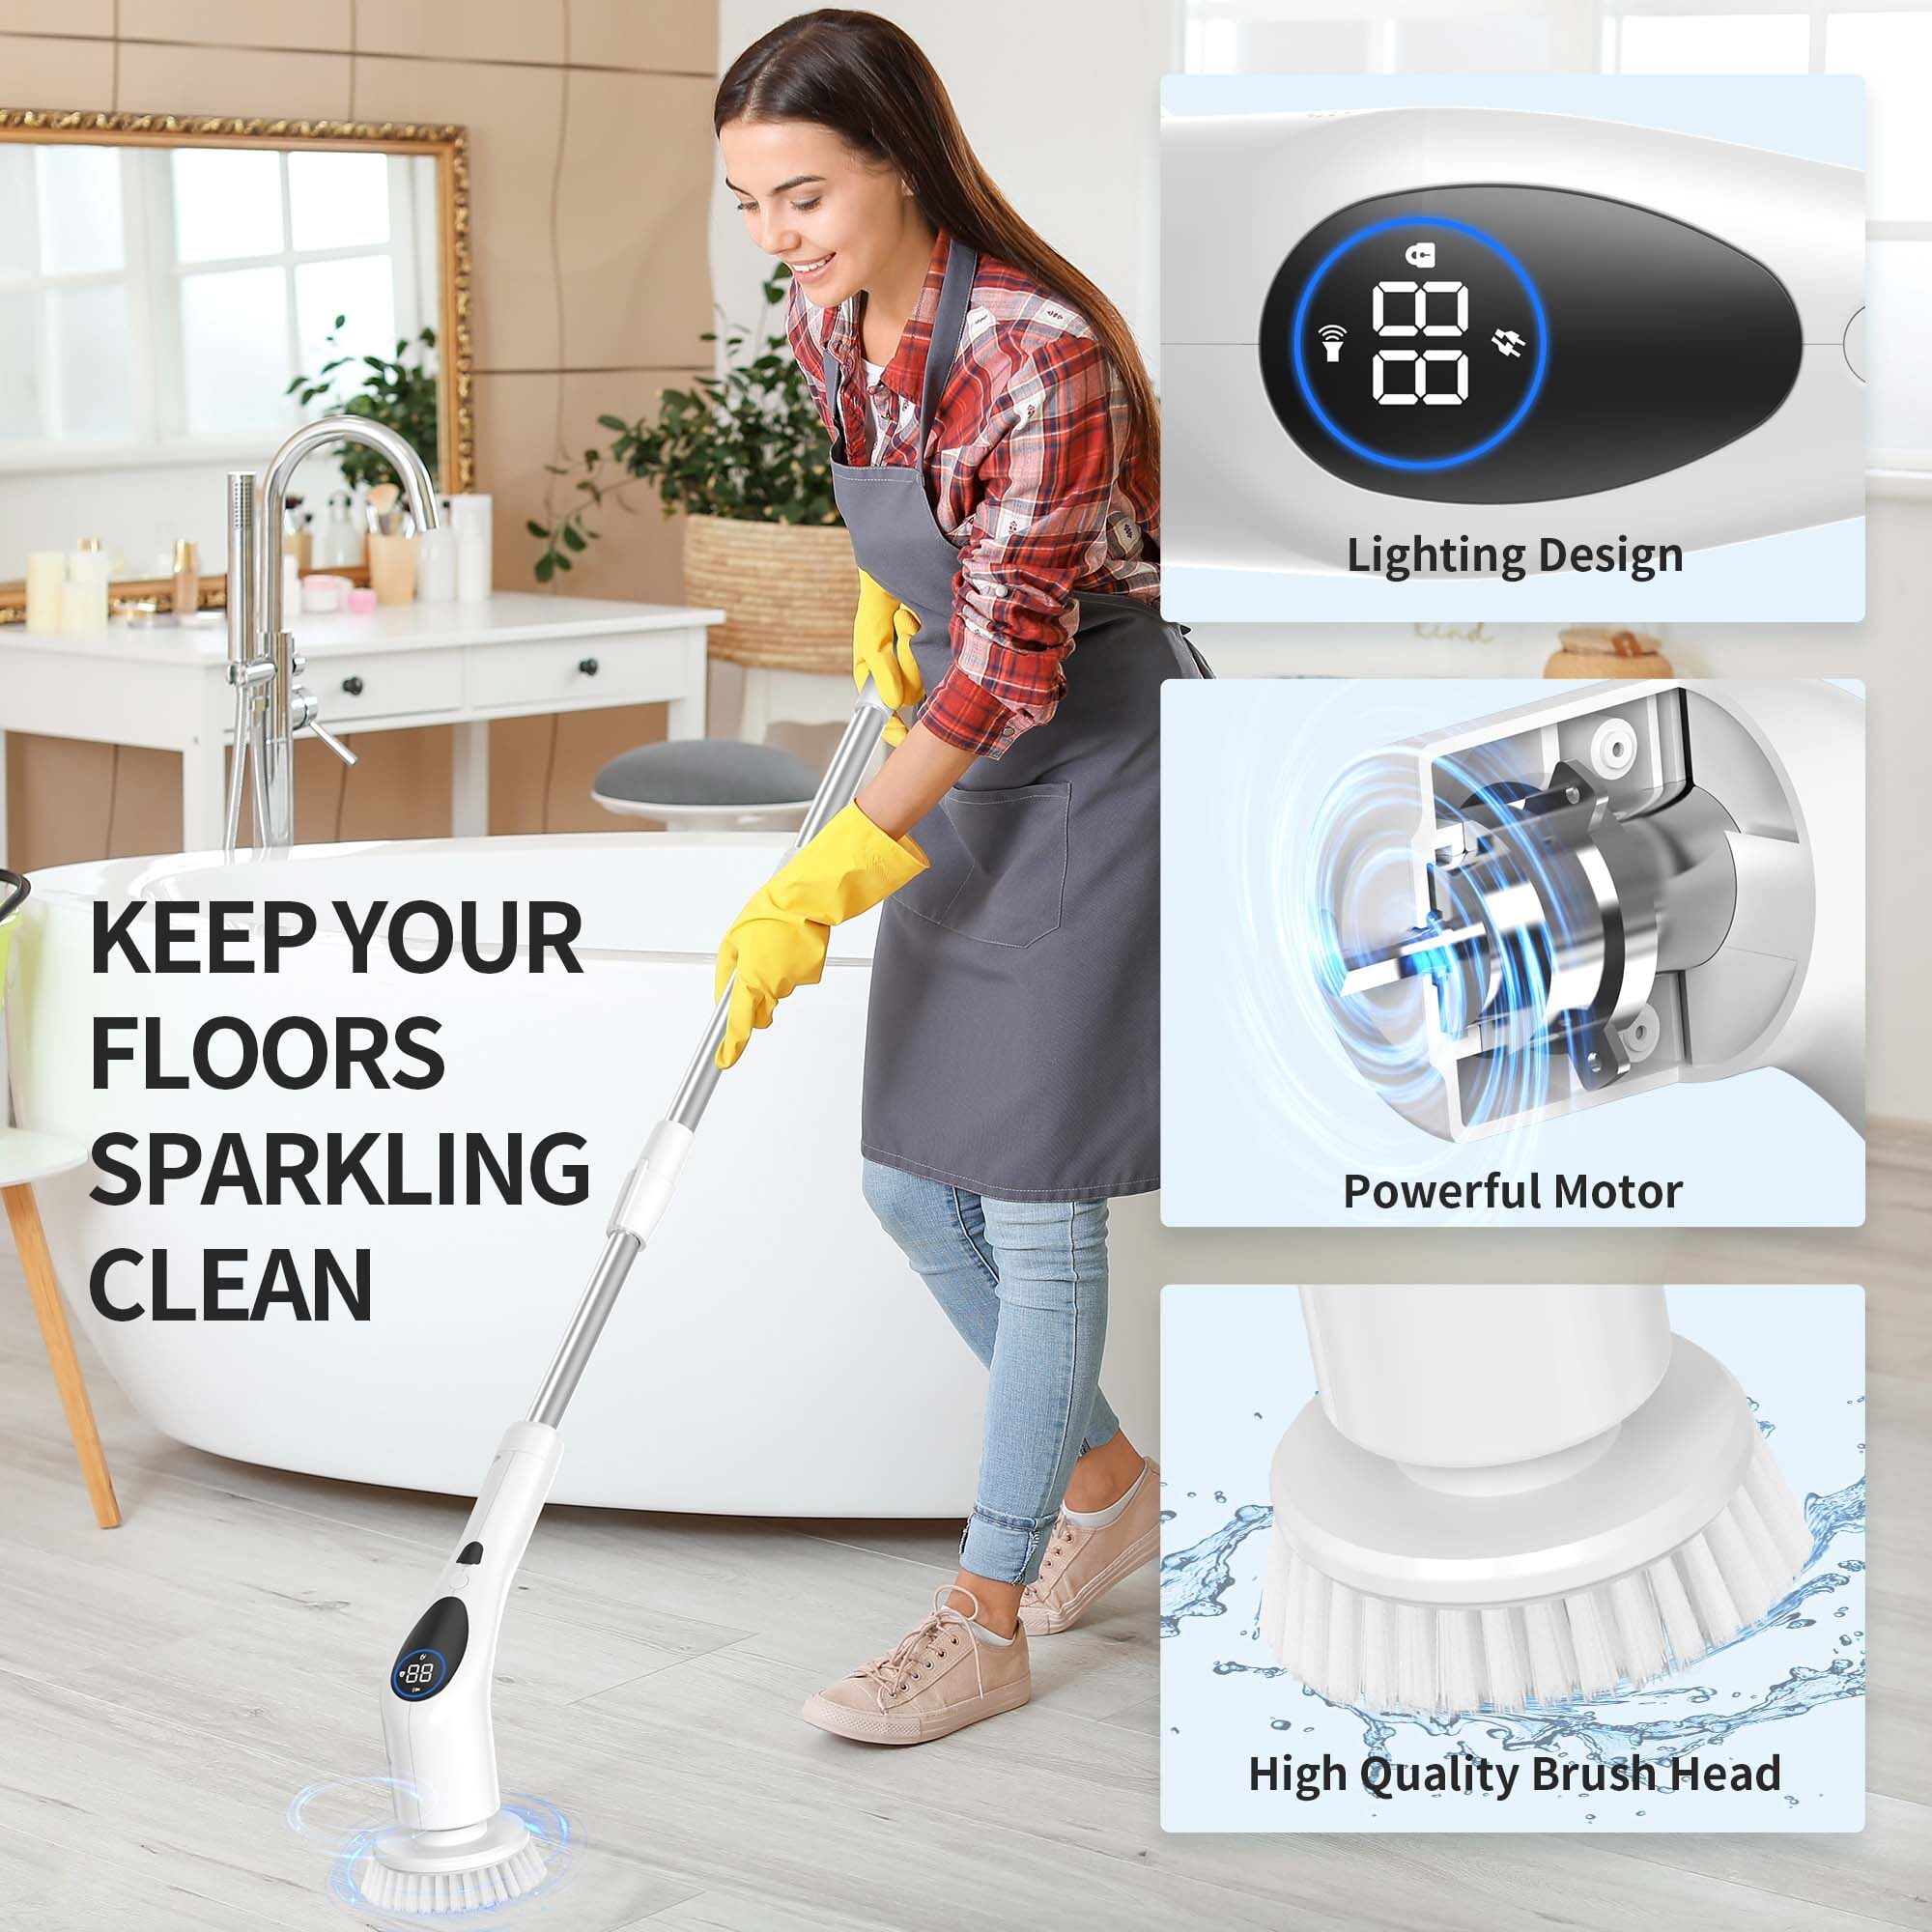 This versatile electric spin scrubber now just $40 at